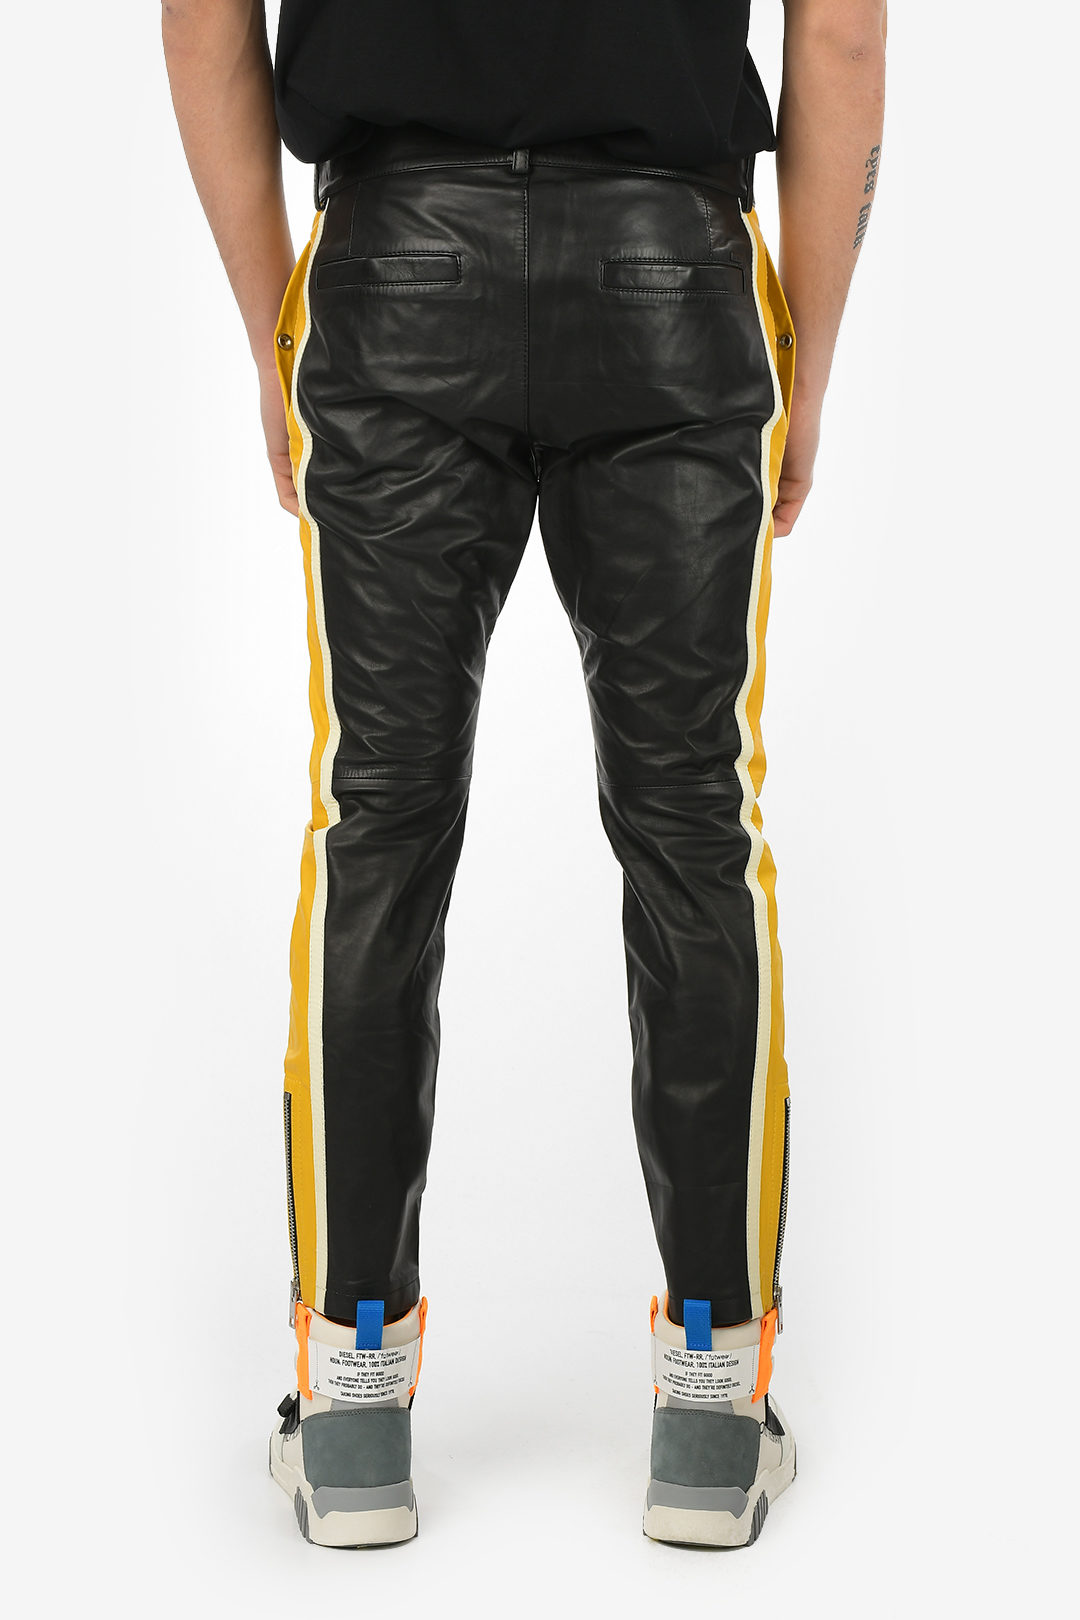 Diesel Leather P-MONTE-L Piping Pants men - Glamood Outlet